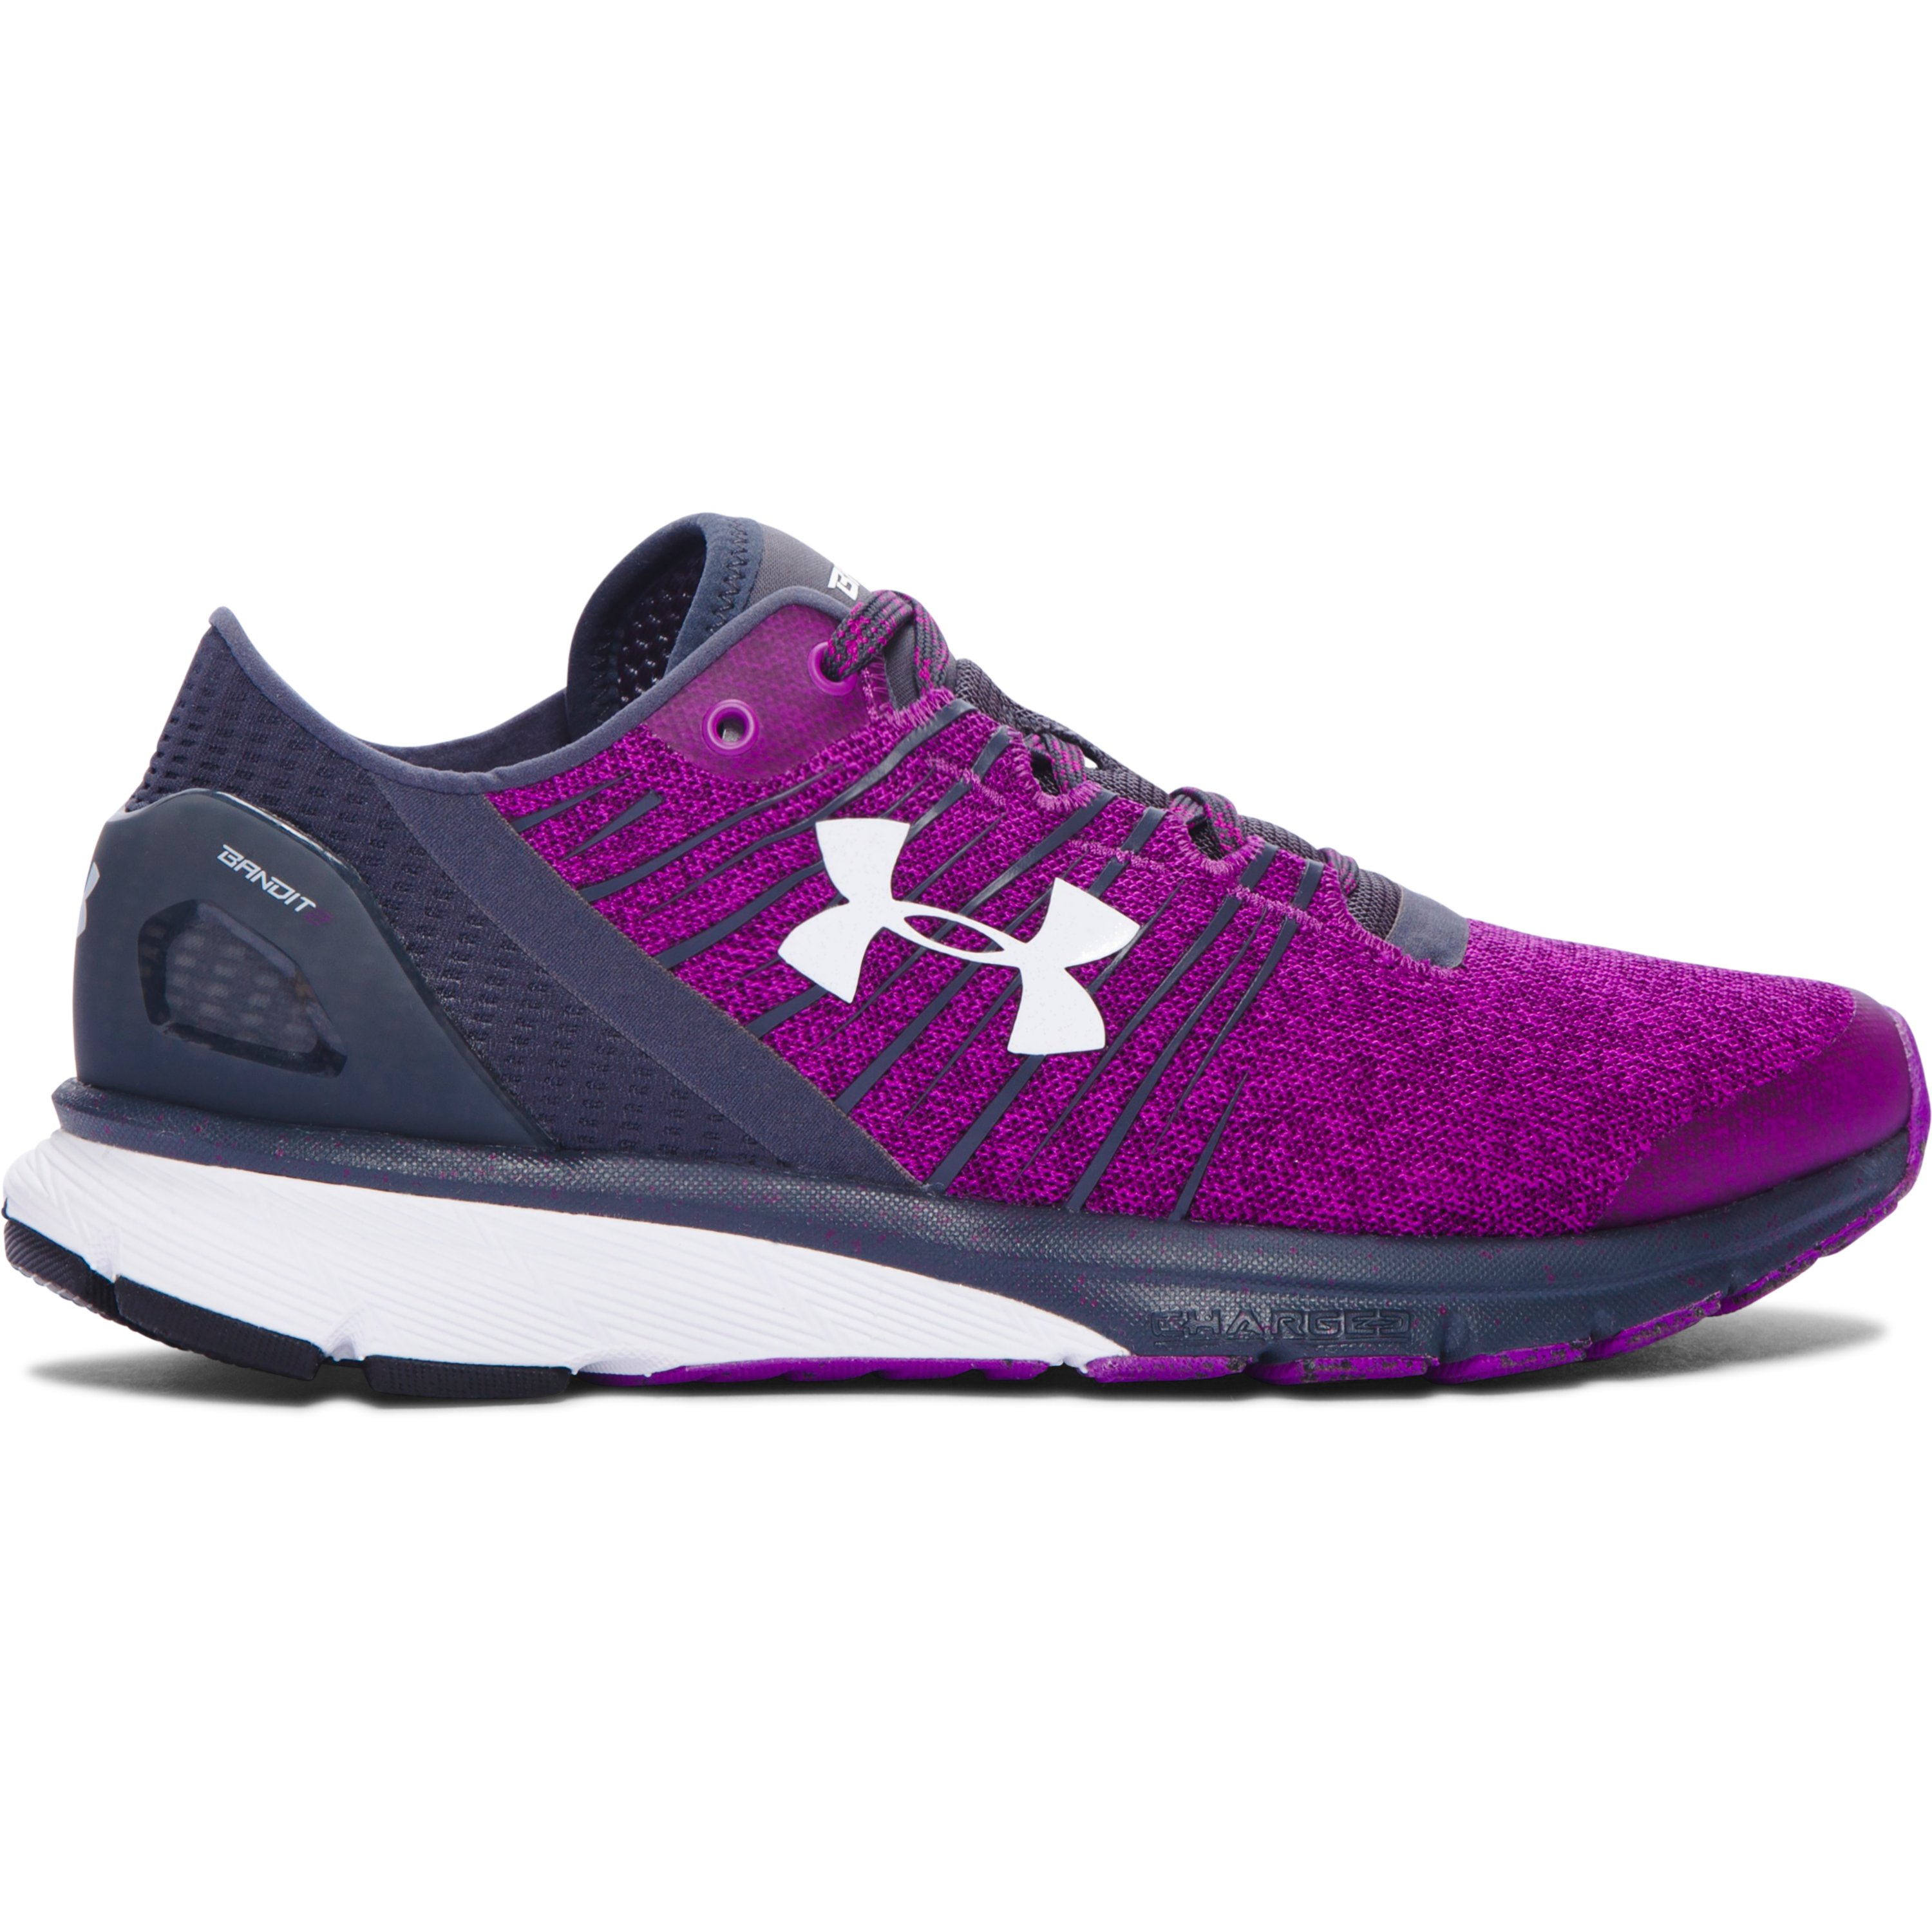 Under Armour Rubber Women's Ua Charged Bandit 2 Running Shoes in Purple |  Lyst